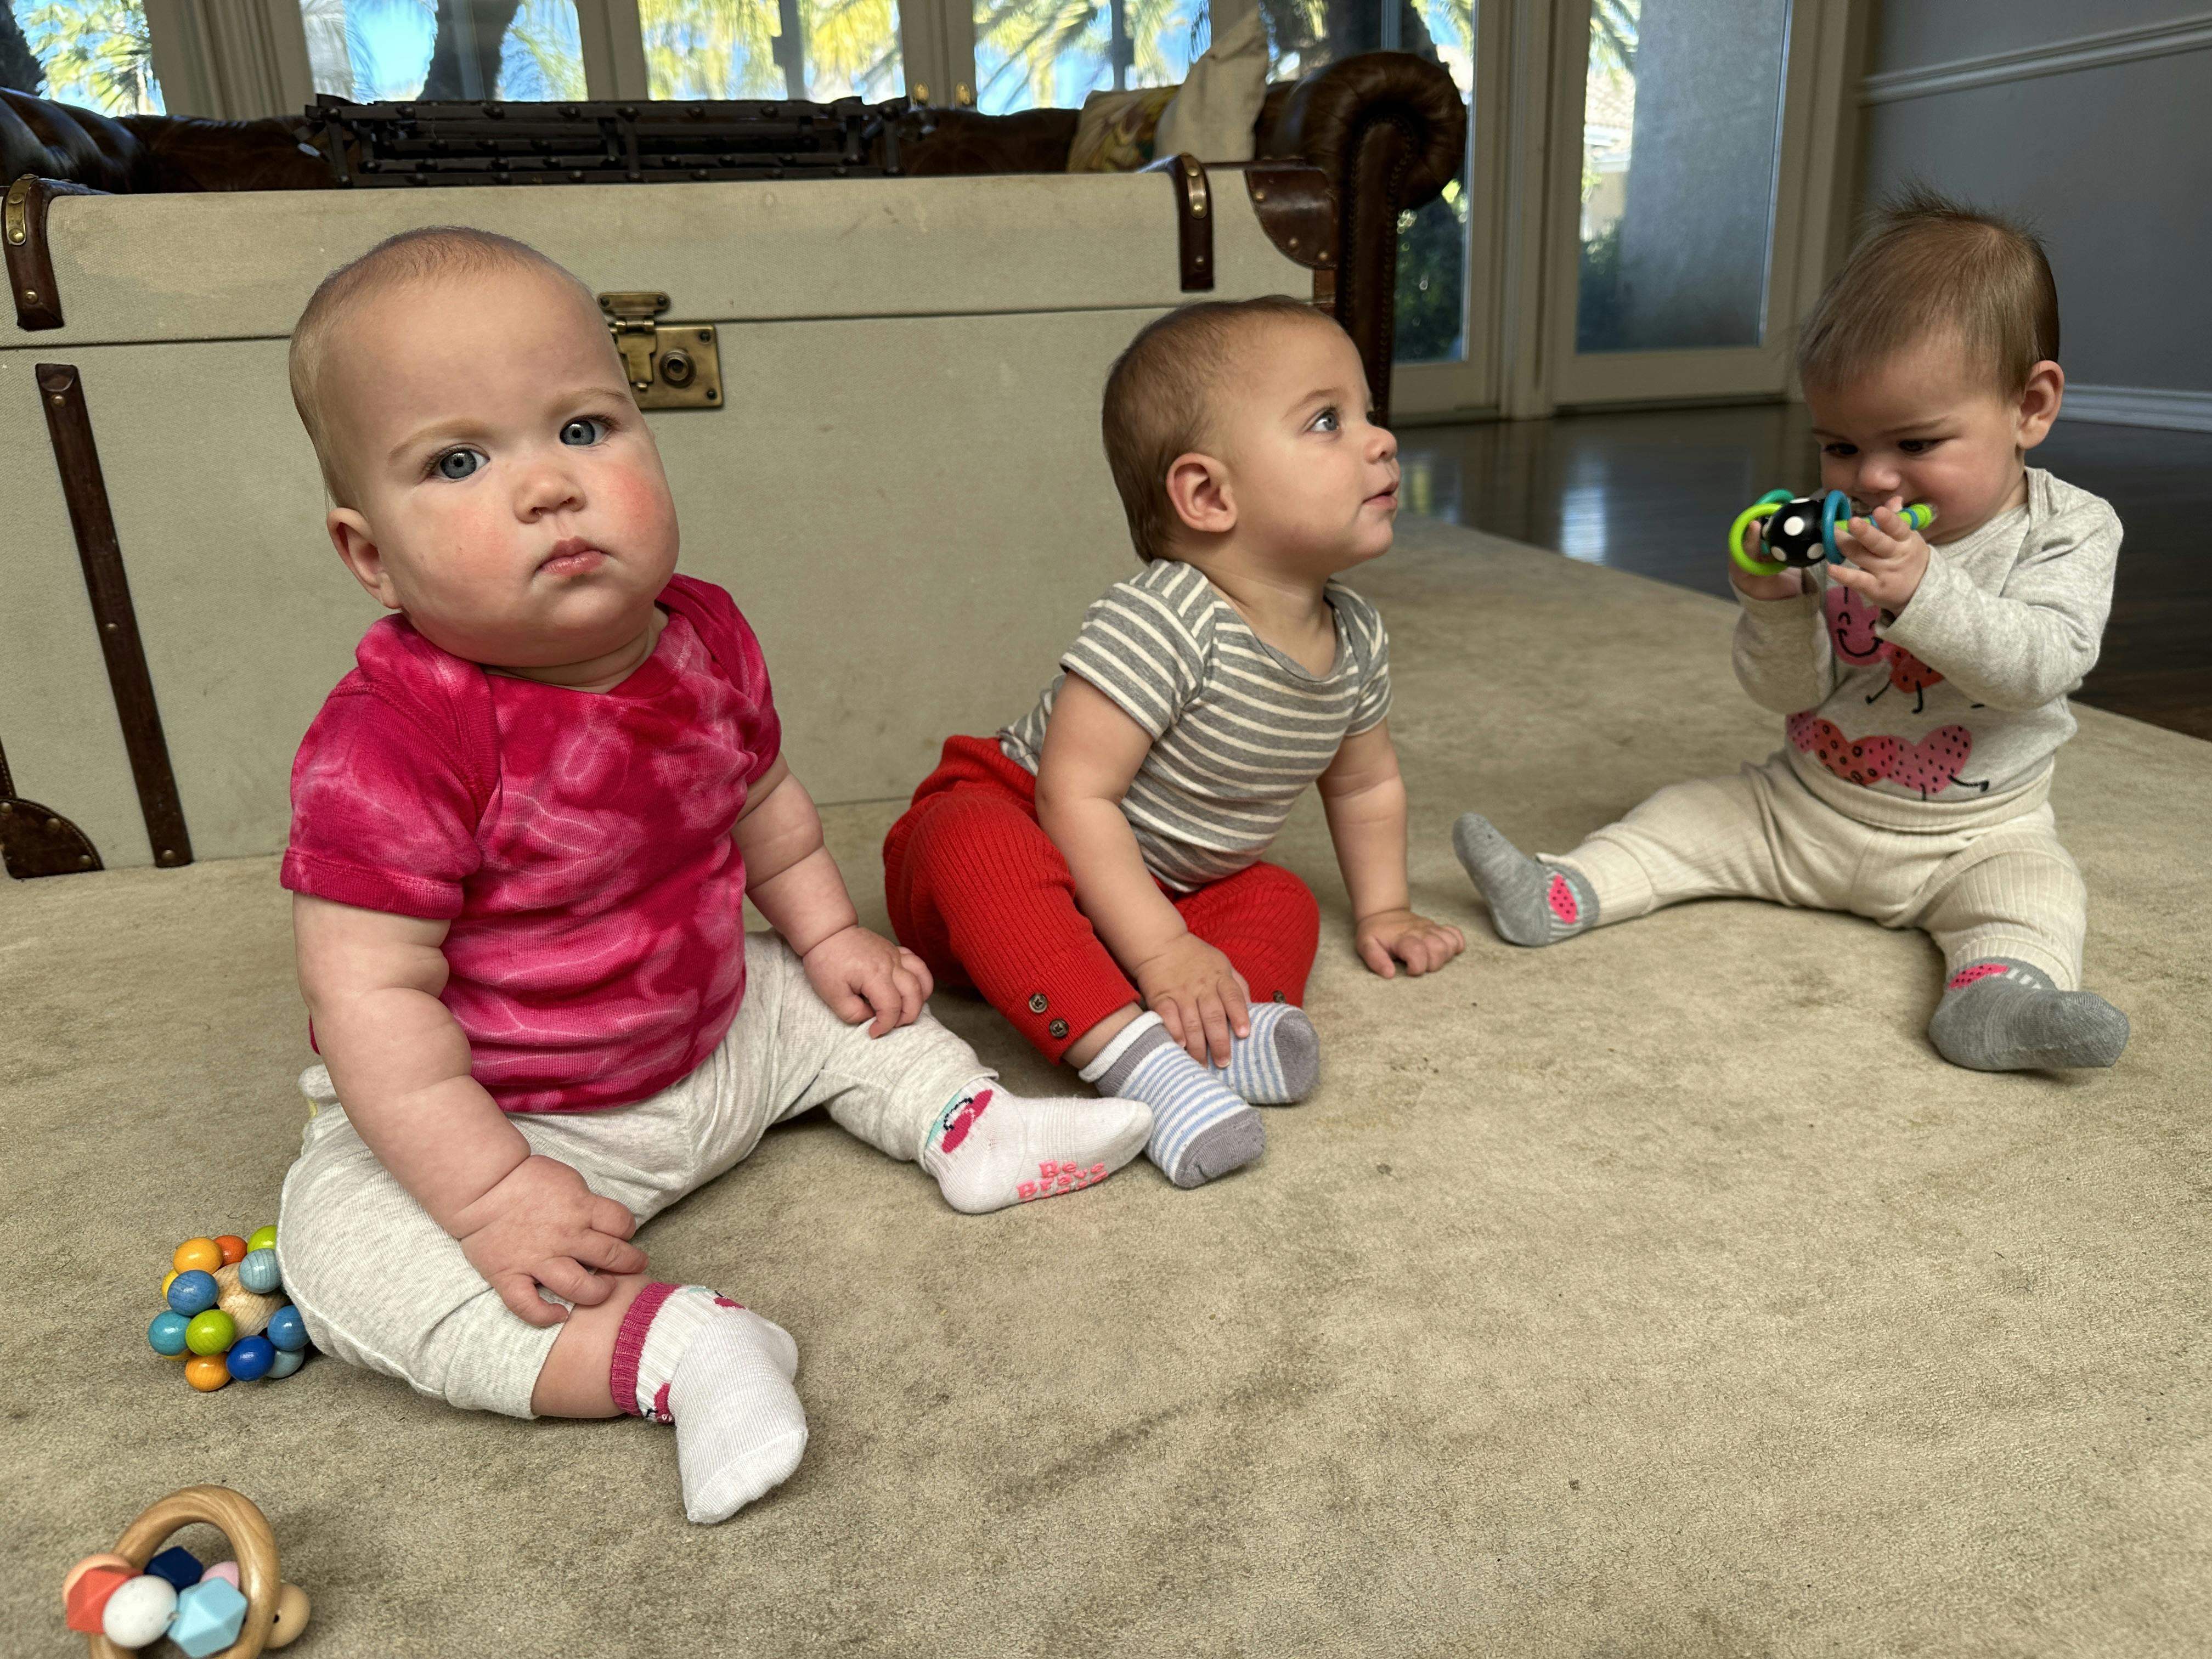 Triplet babies sitting by themsleves, unassisted on carpet